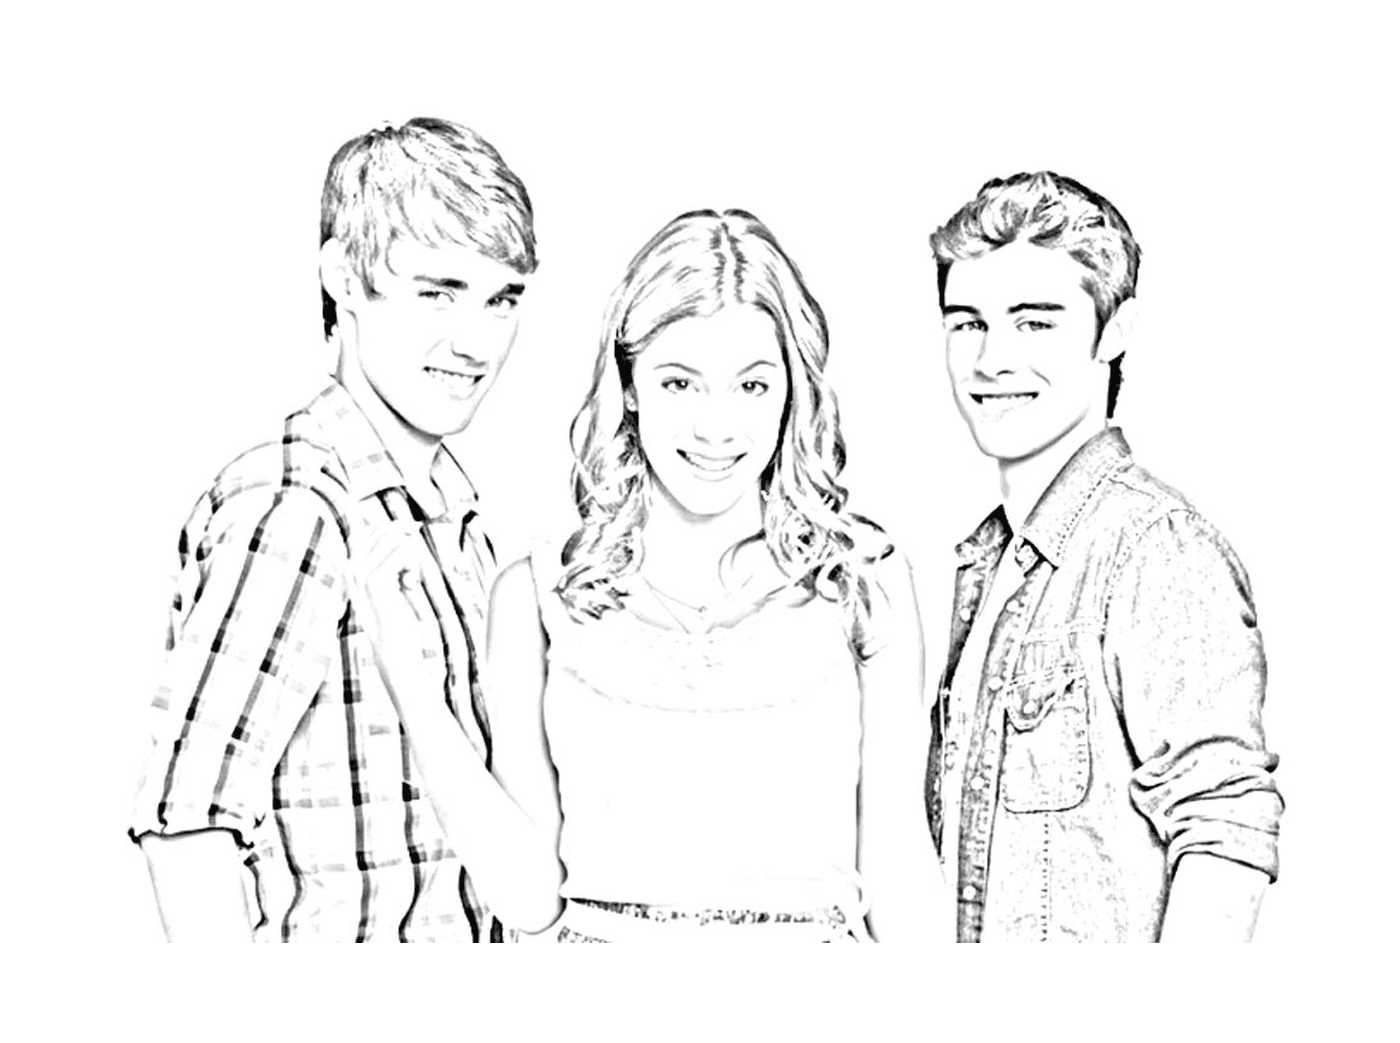  Violetta and two boys 